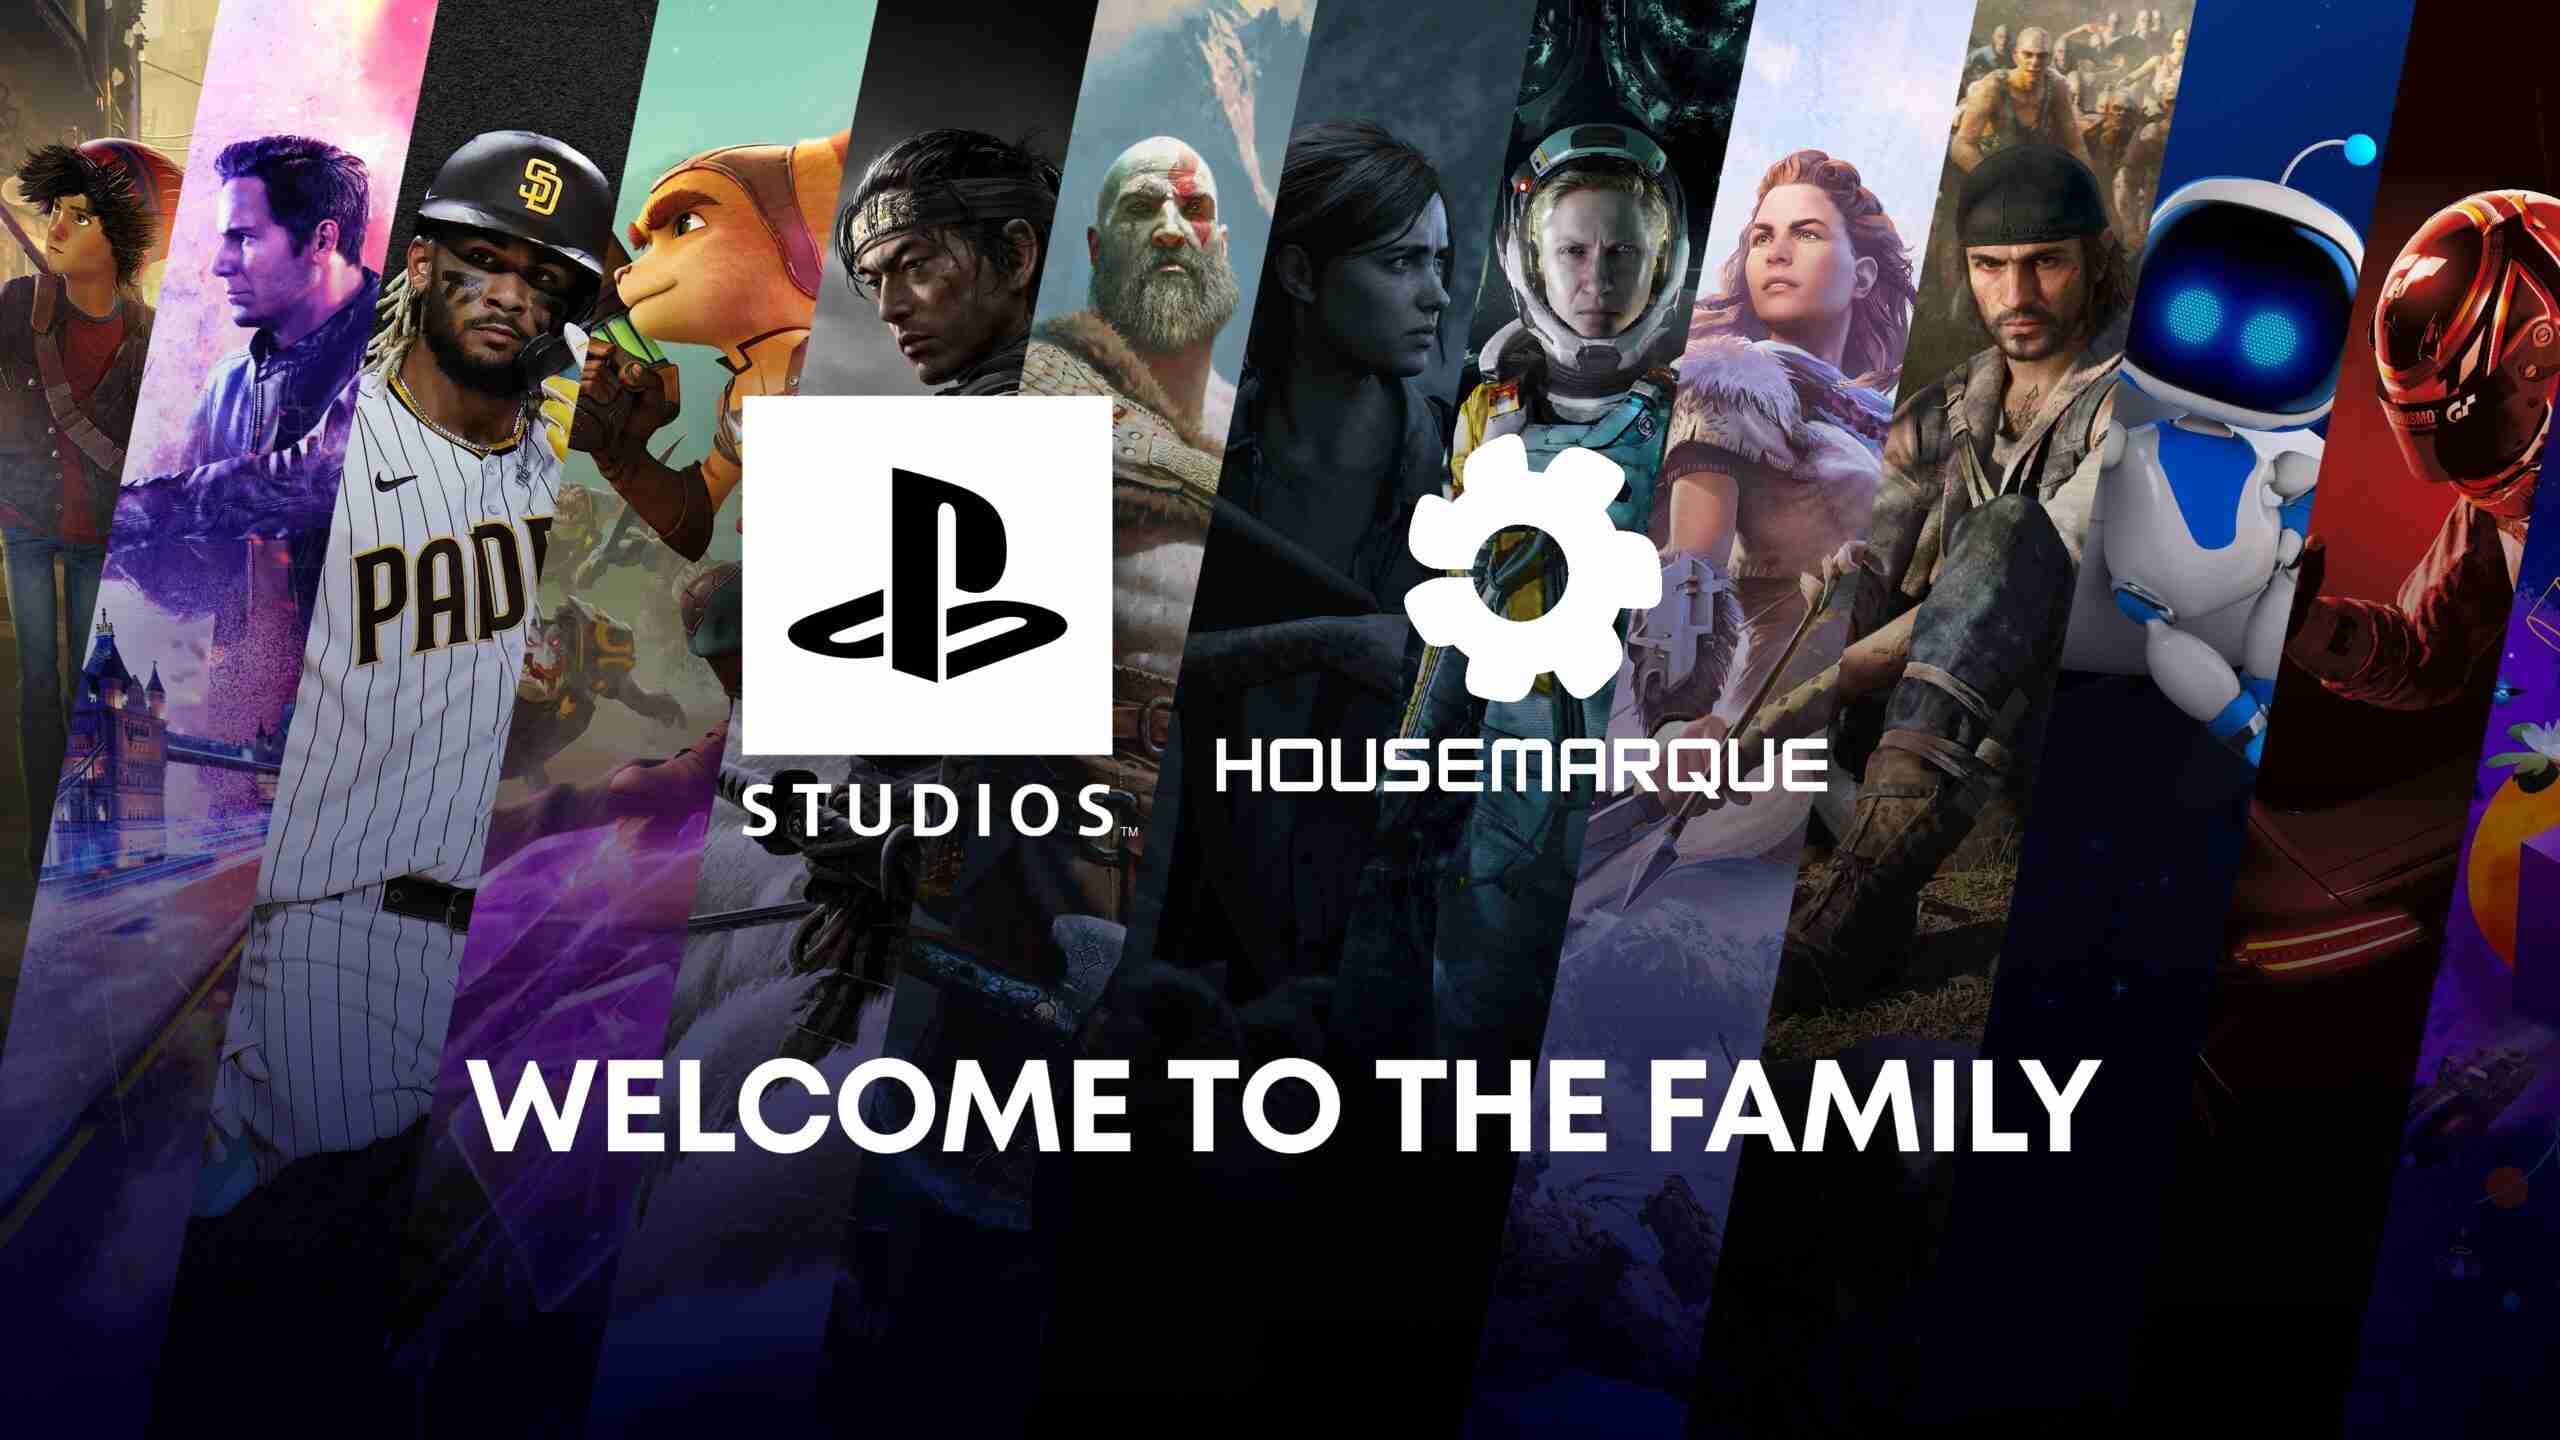 Sony Bought Oldest Finnish Gaming Studio Housemarque